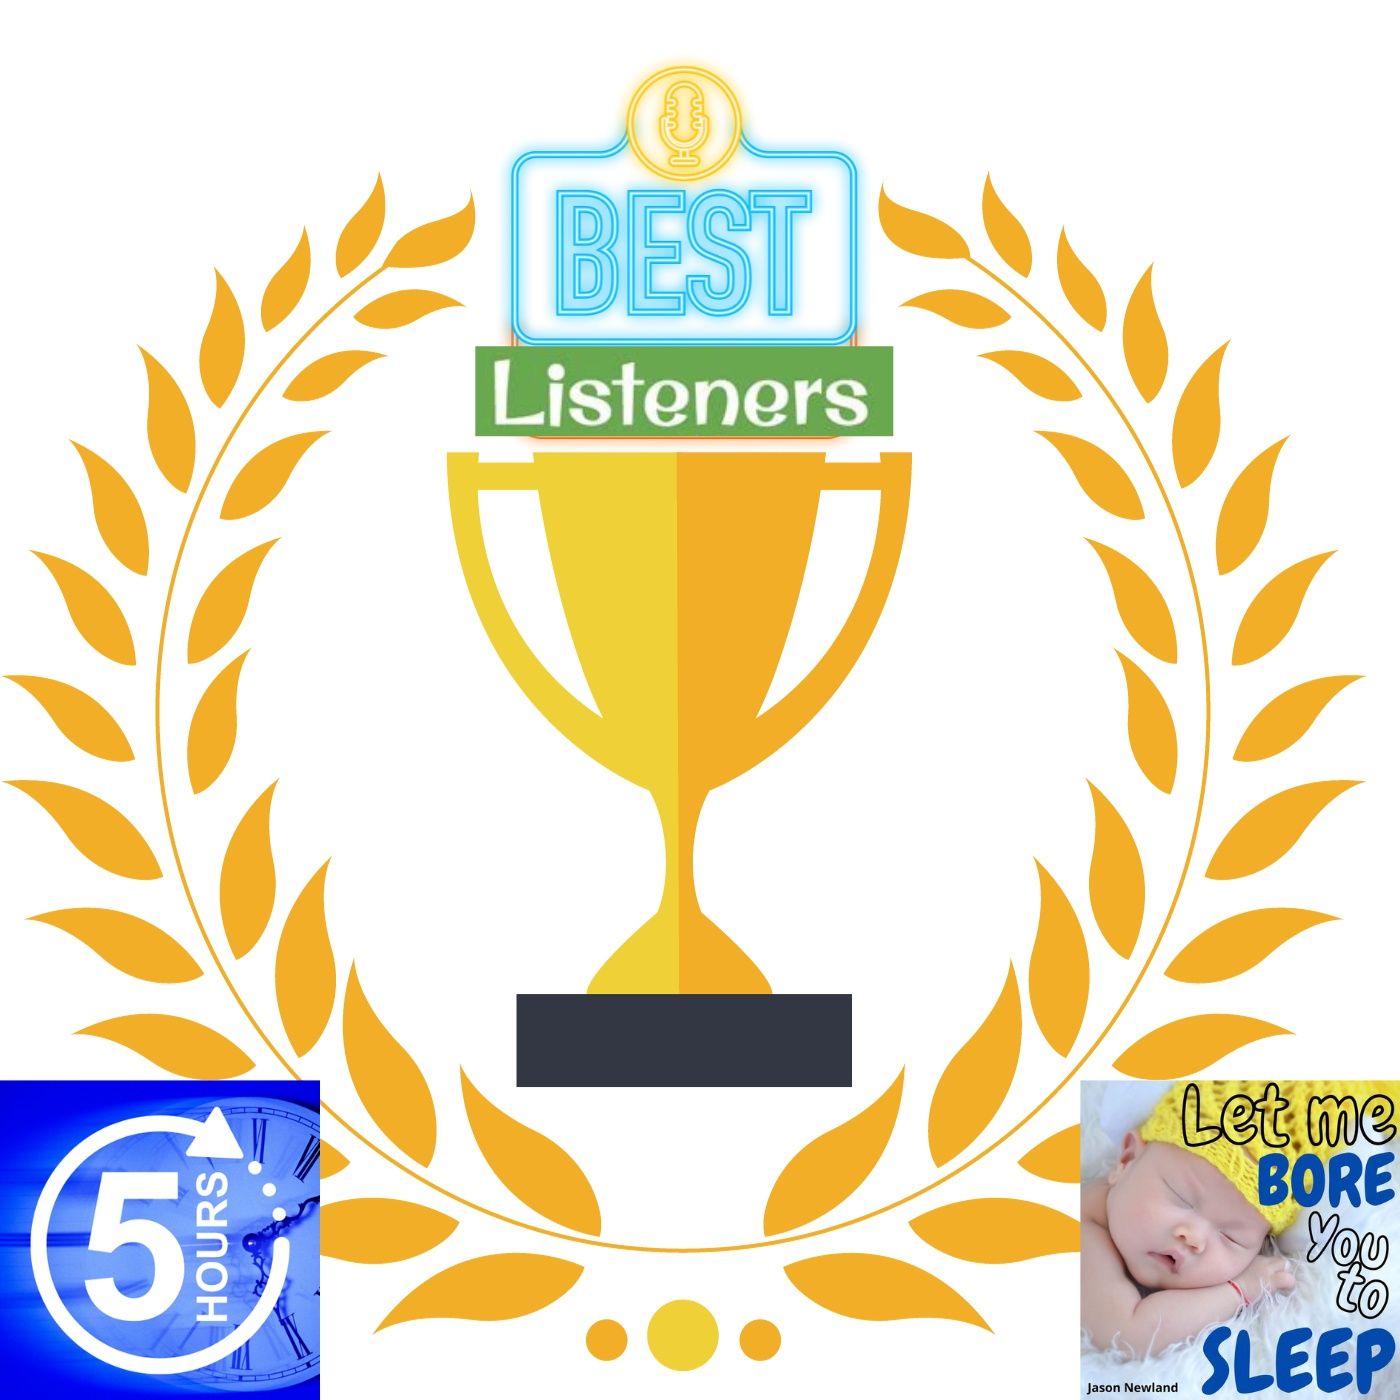 (5 hours) #1047 - I have the BEST listeners - Let me bore you to sleep